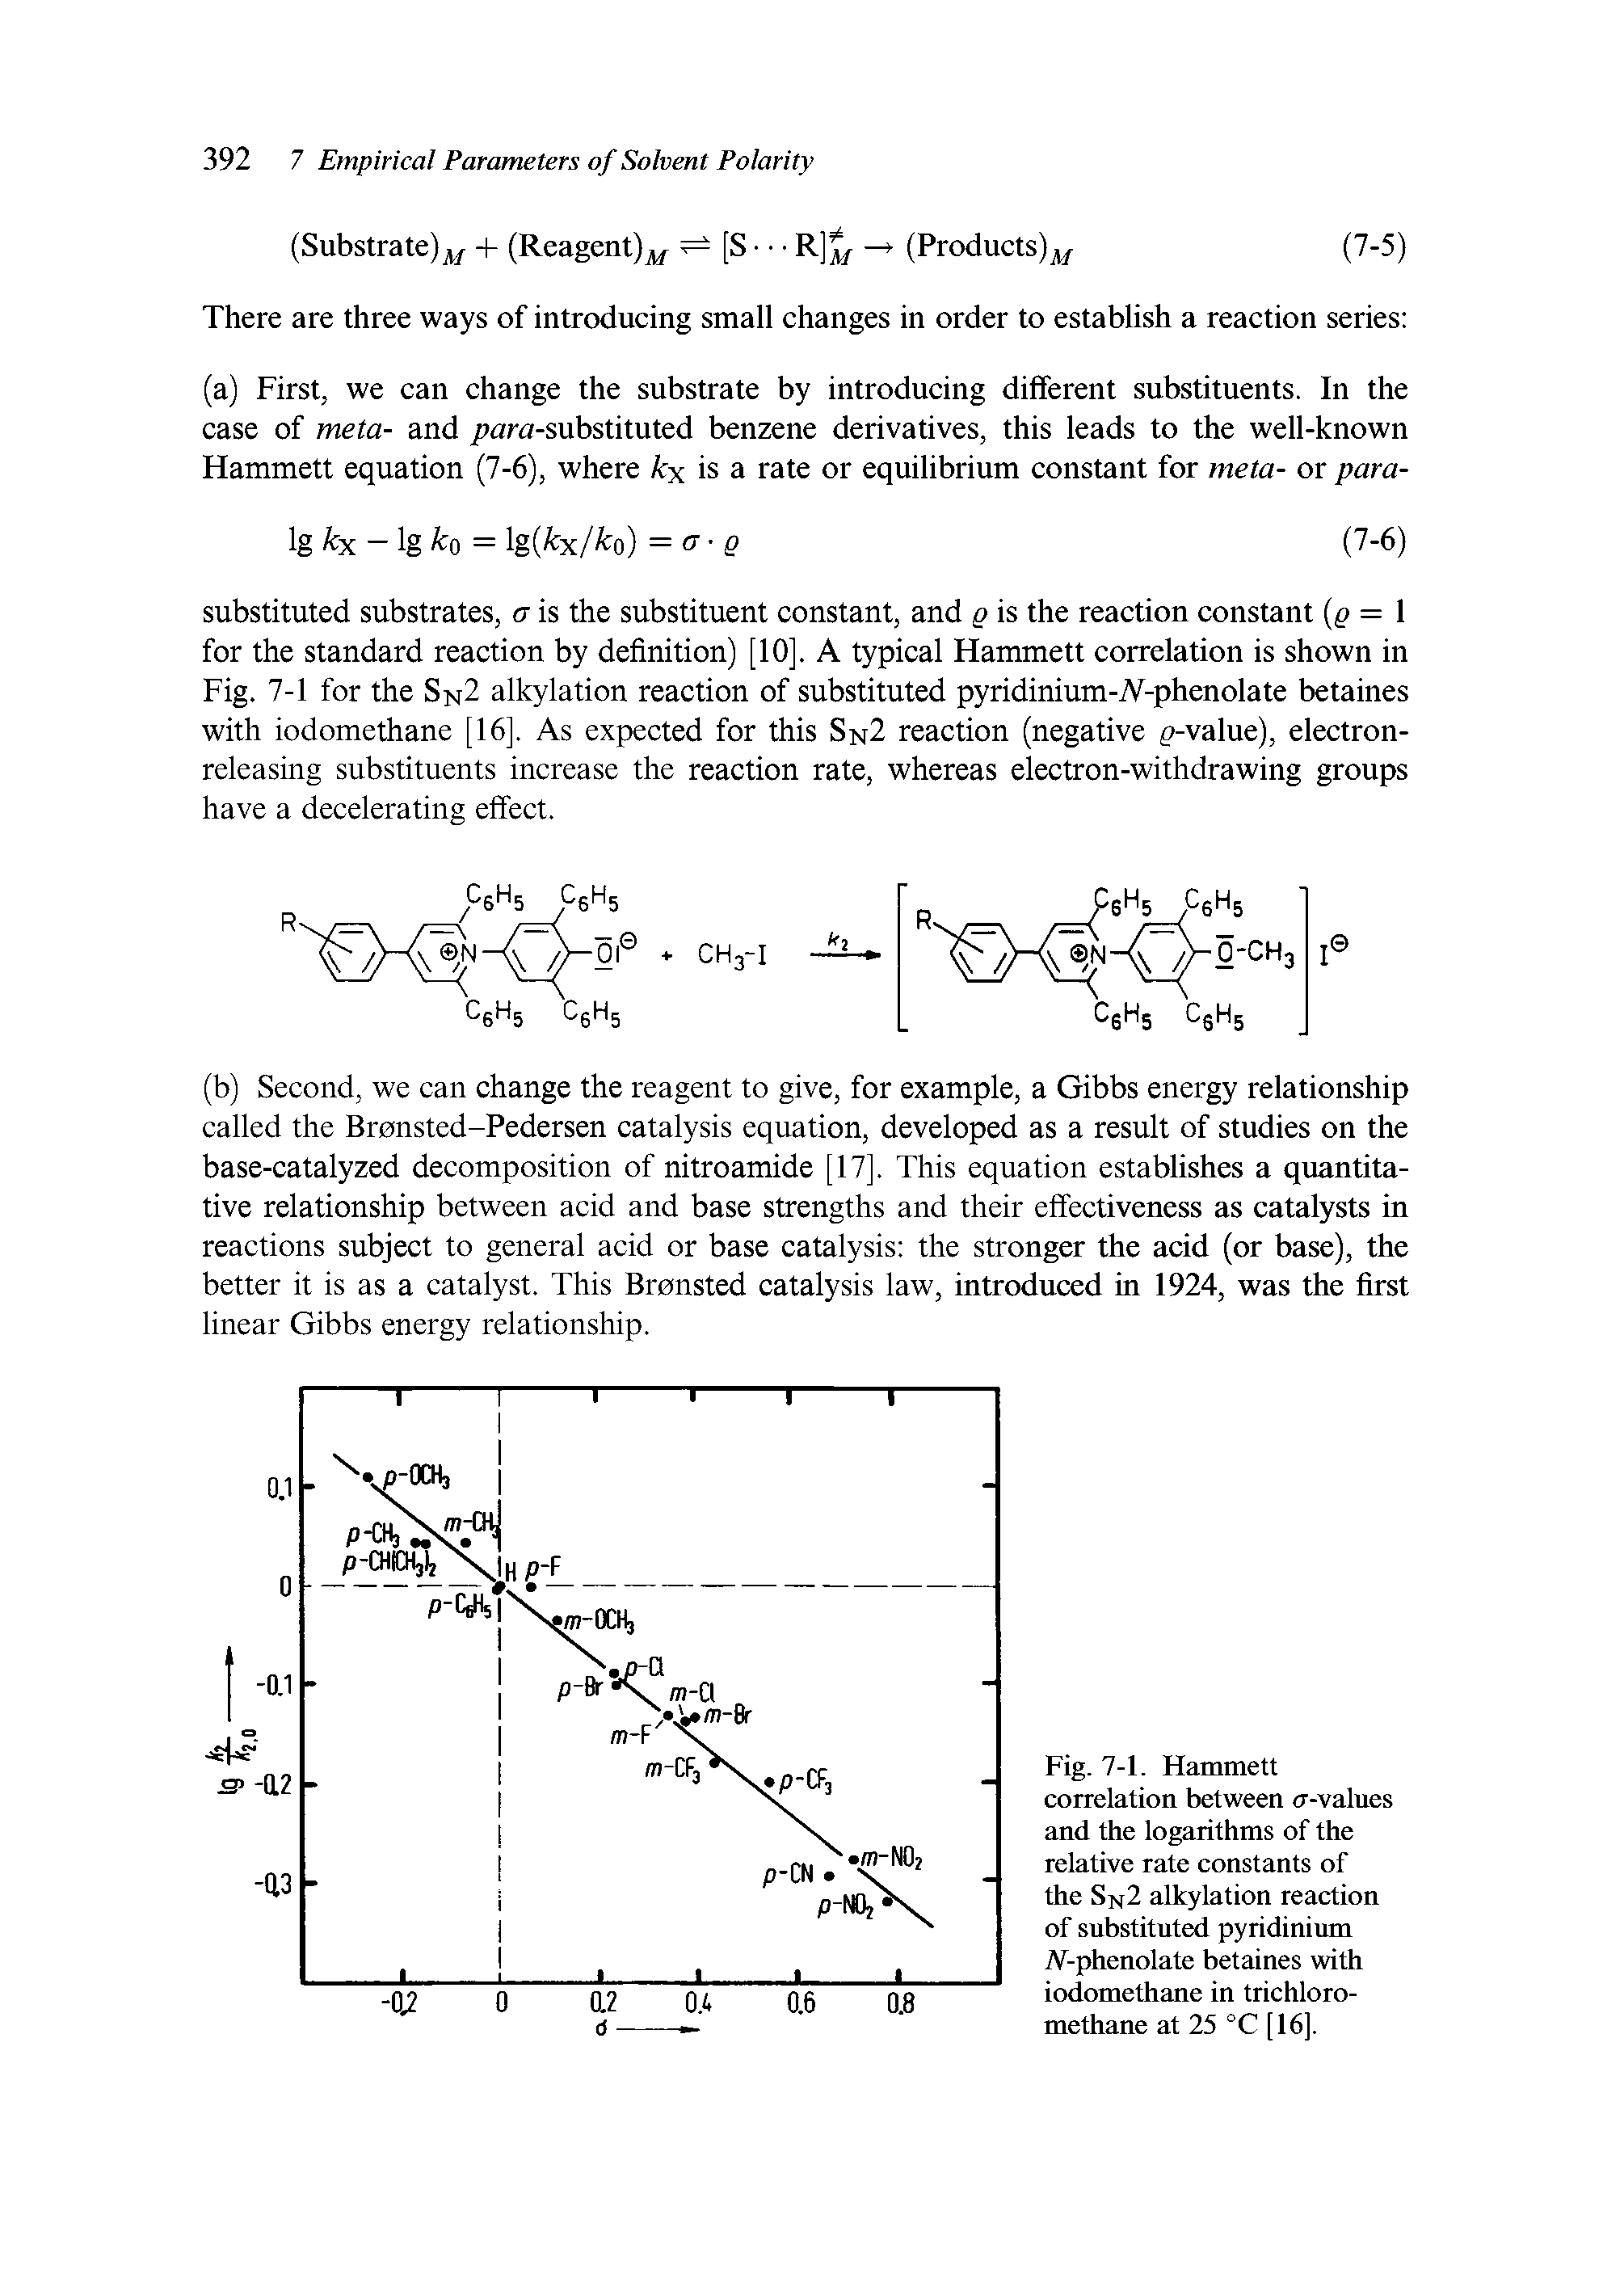 Fig. 7-1. Flammett correlation between ir-values and the logarithms of the relative rate constants of the Sn2 alkylation reaction of substituted pyridinium iV-phenolate betaines with iodomethane in trichloro-methane at 25 °C [16].